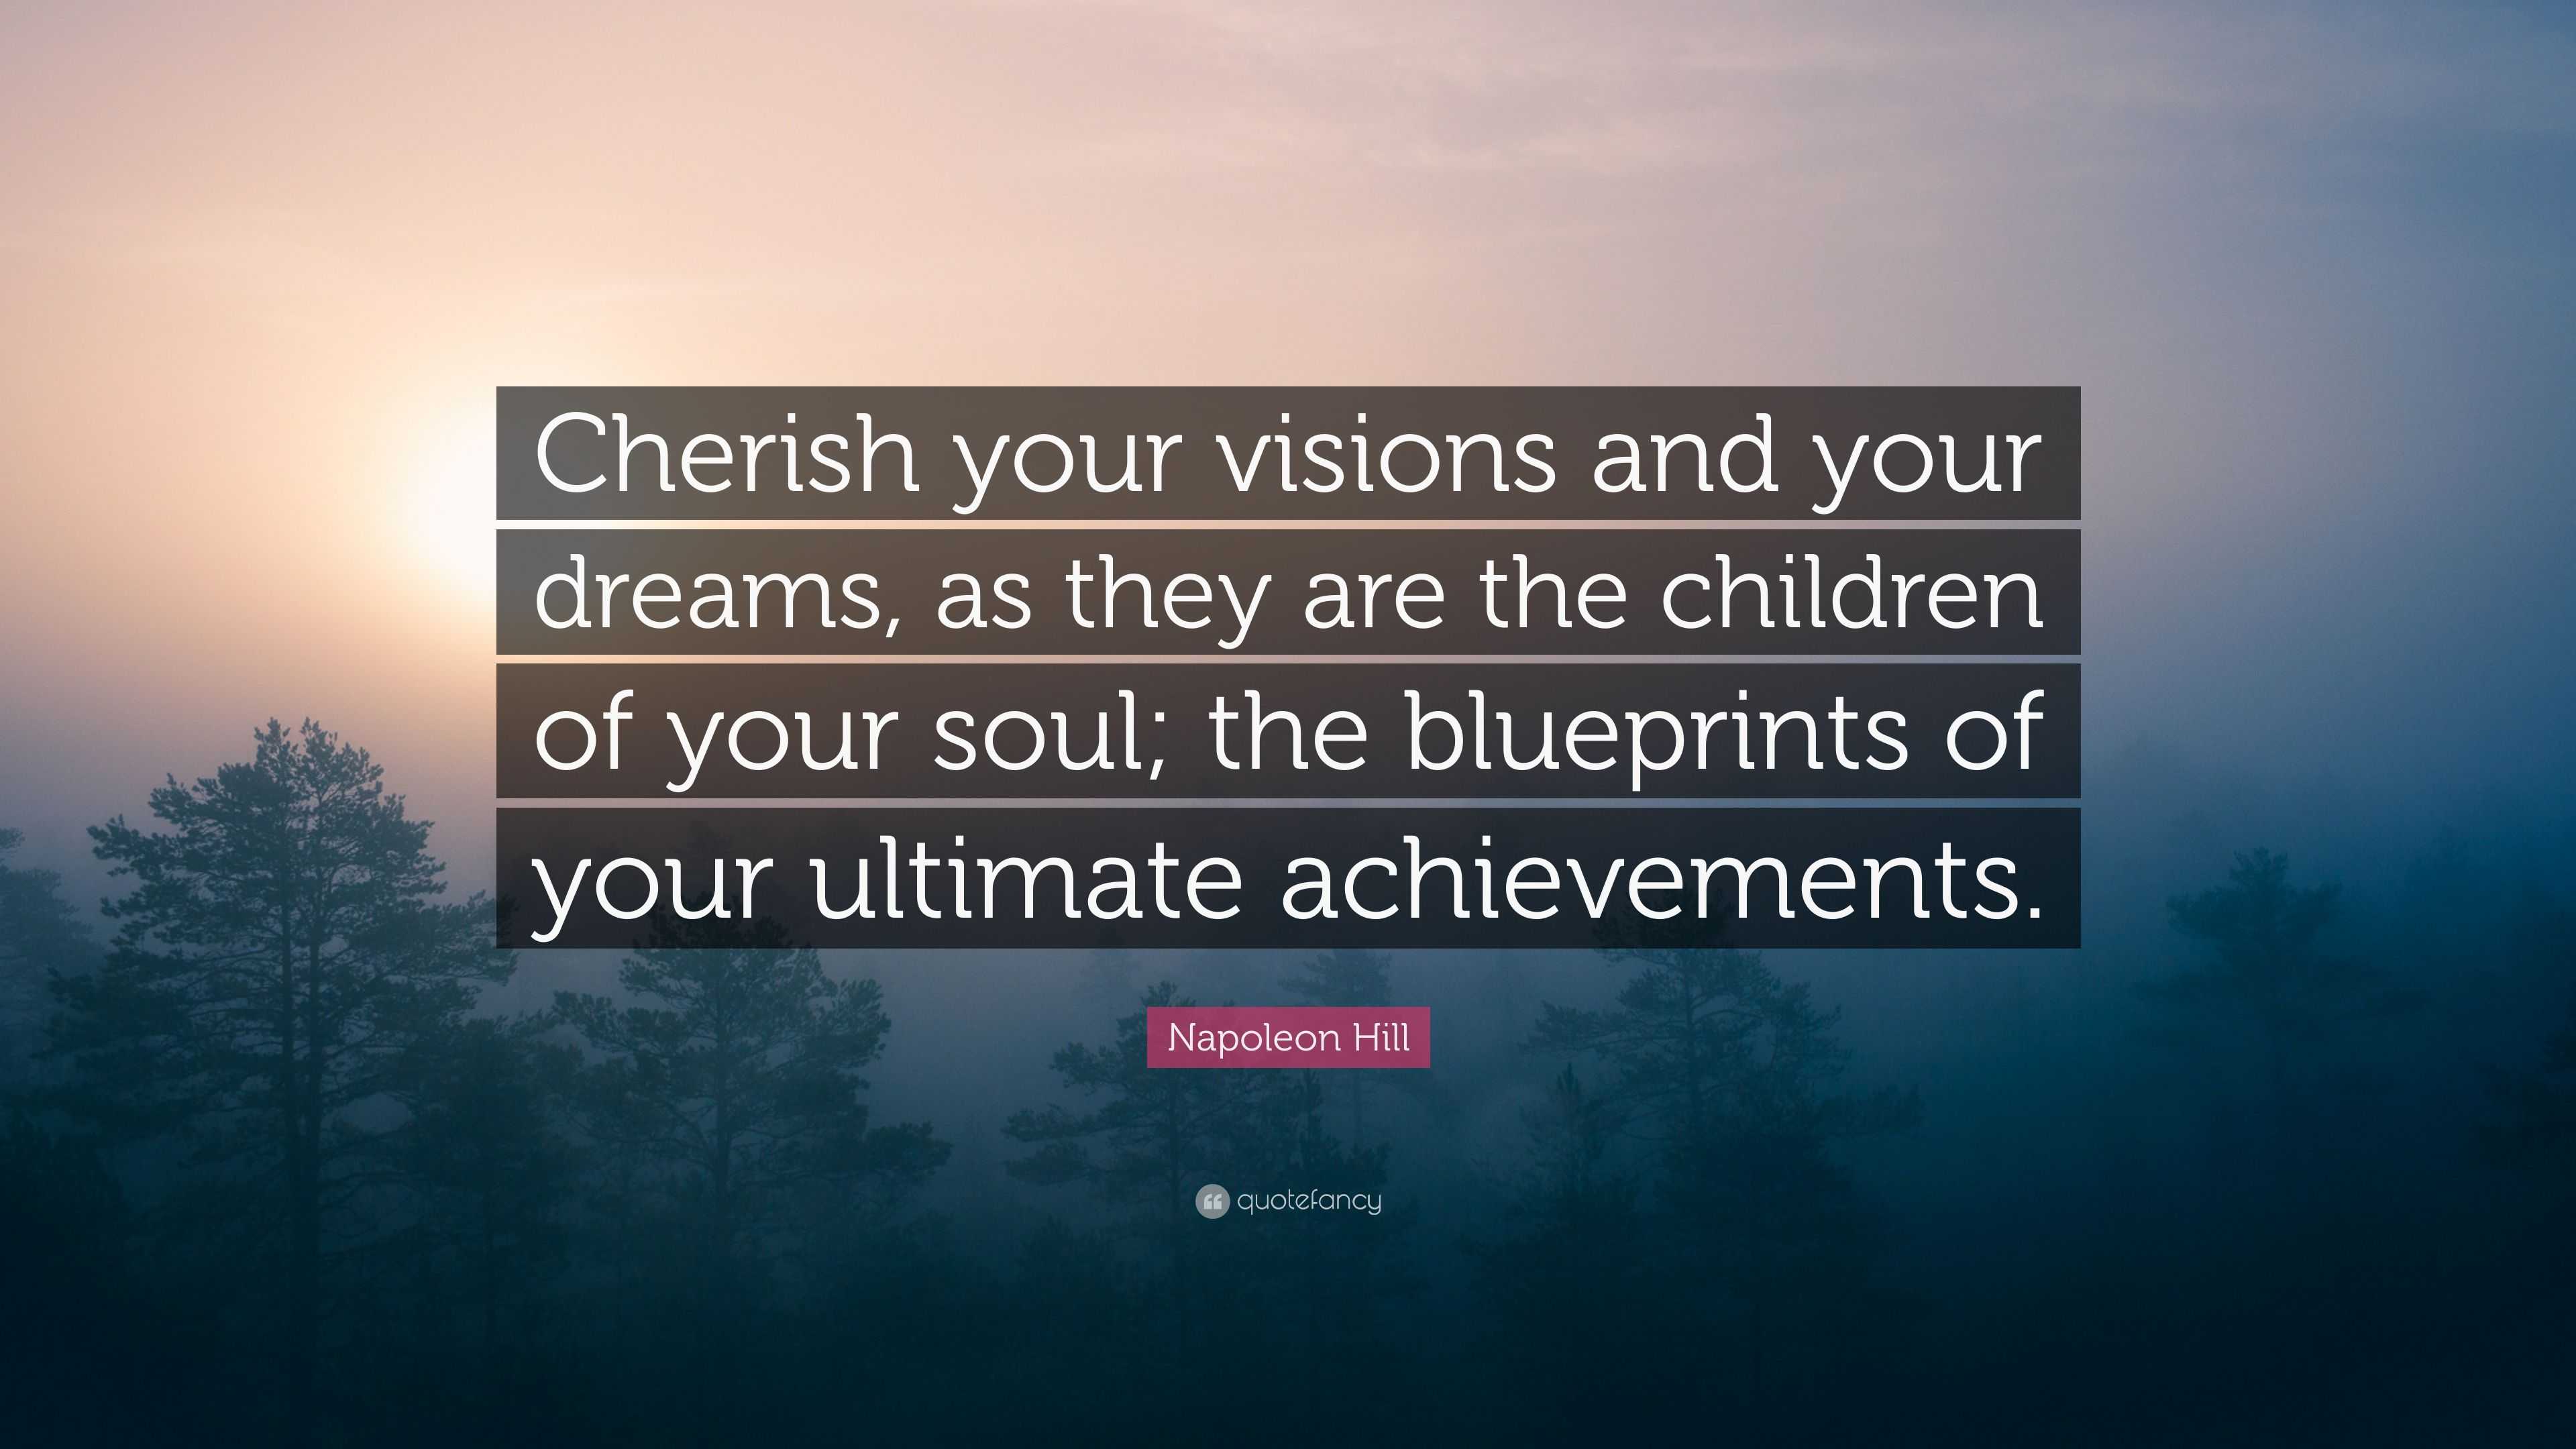 Napoleon Hill Quote “Cherish your visions and your dreams